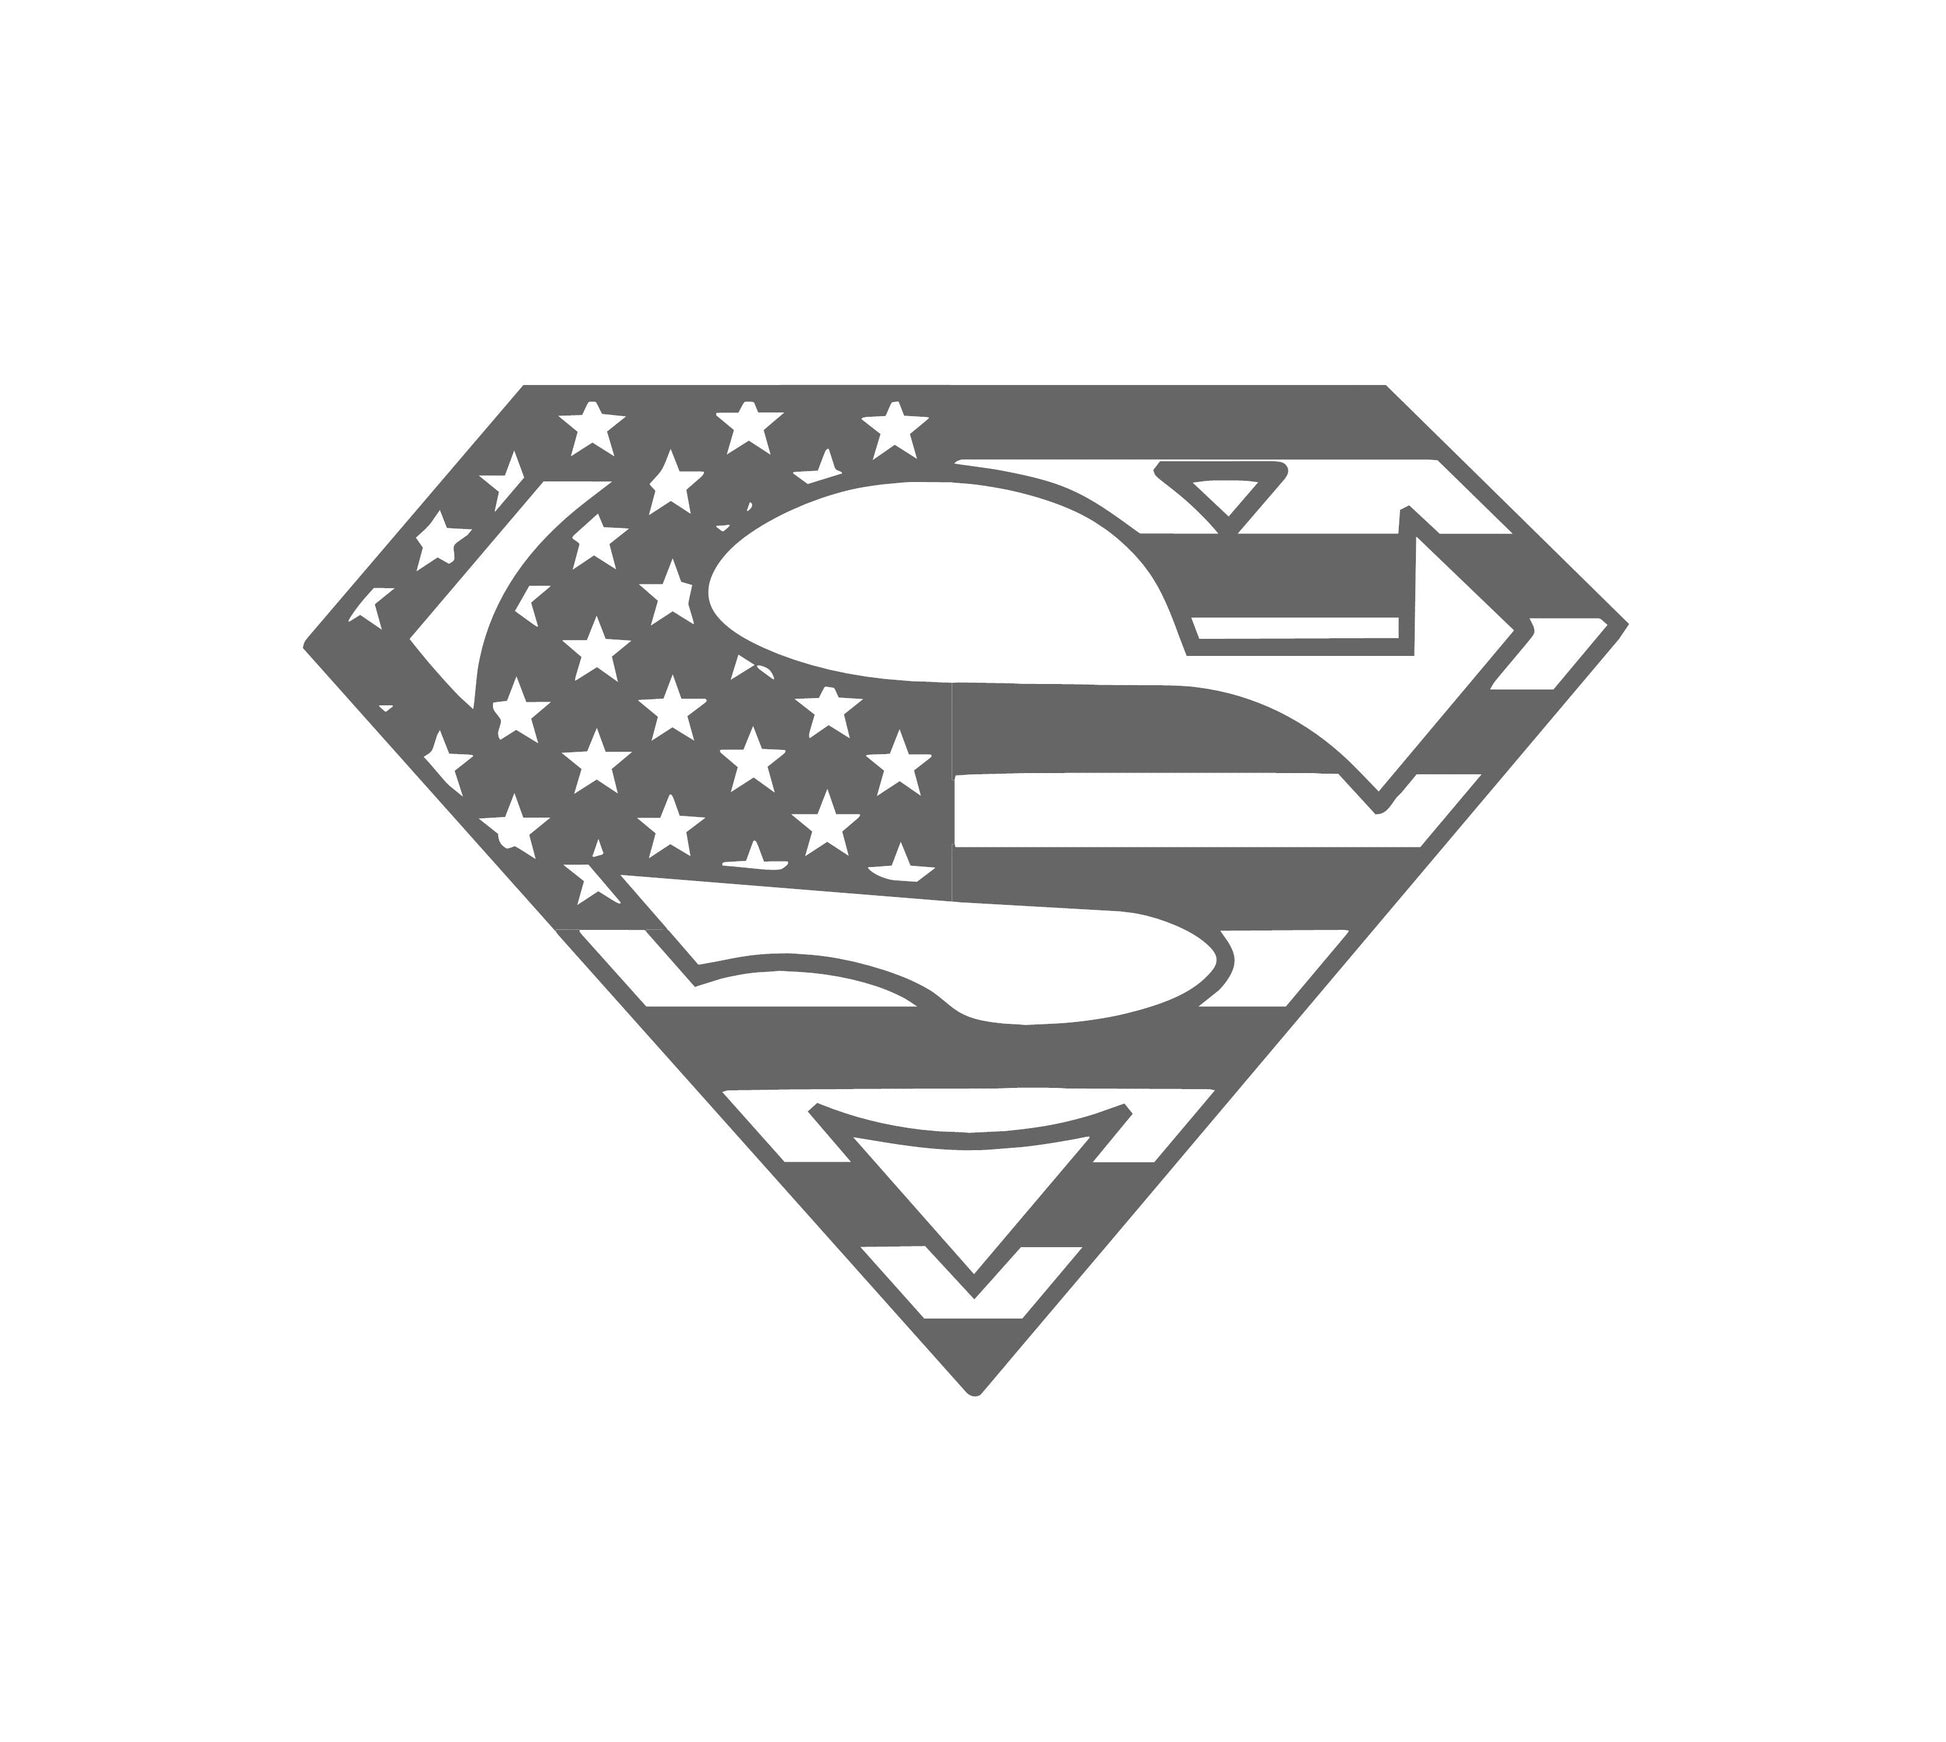 Superman Tattoo Designs: A Symbol of Strength and Heroism